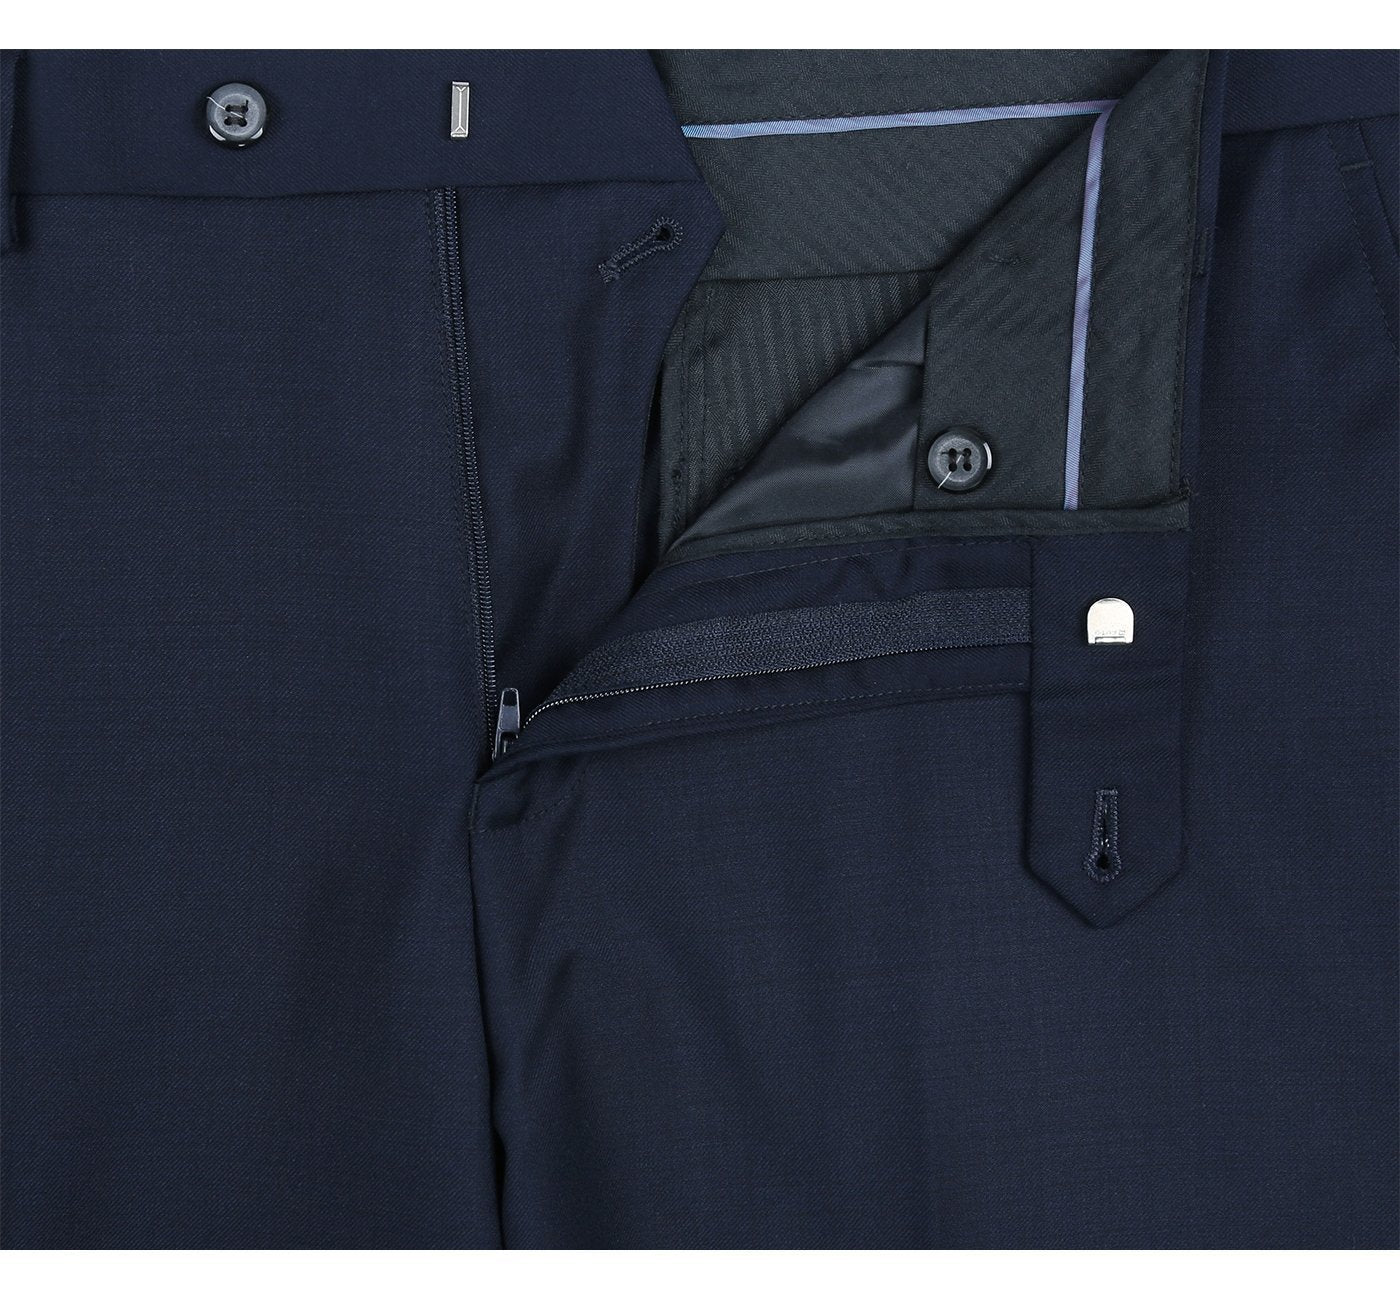 Super 140s Wool 2-Button CLASSIC FIT Suit in Navy (Short, Regular, and Long Available) by Renoir